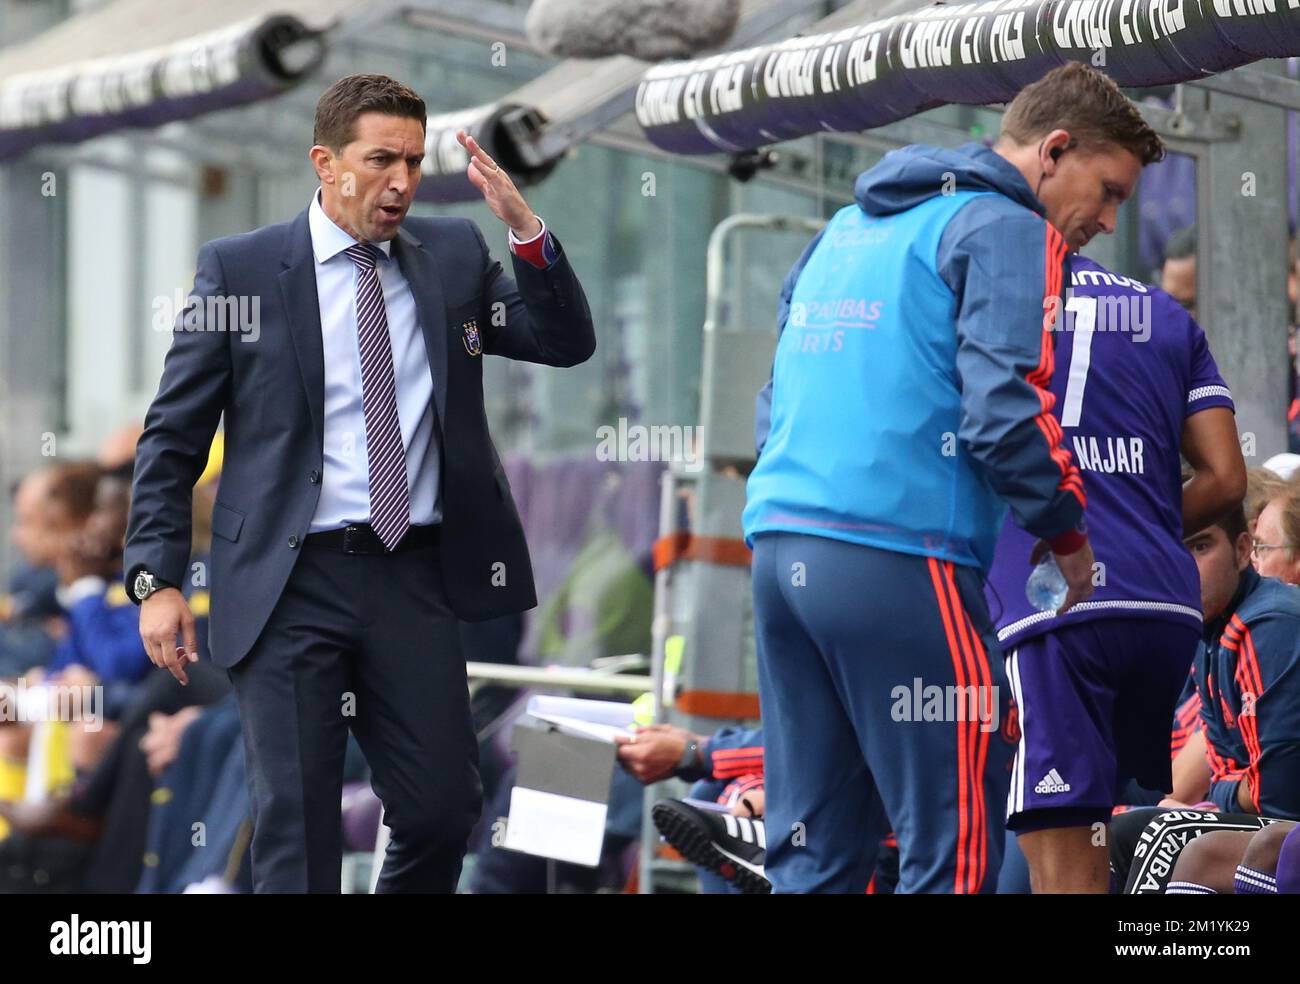 20150726 - BRUSSELS, BELGIUM: Anderlecht's head coach Besnik Hasi and Anderlecht's Andy Najar pictured during the Jupiler Pro League match between RSC Anderlecht and Waasland-Beveren, in Brussels, Sunday 26 July 2015, on day 01 of the Belgian soccer championship. BELGA PHOTO VIRGINIE LEFOUR Stock Photo